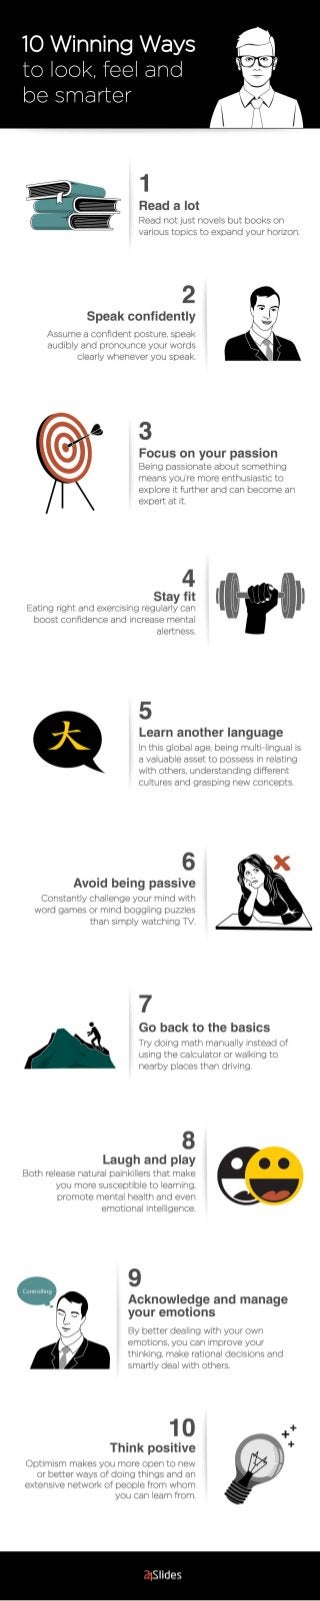 10 Winning Ways to Look, Feel and Be Smarter